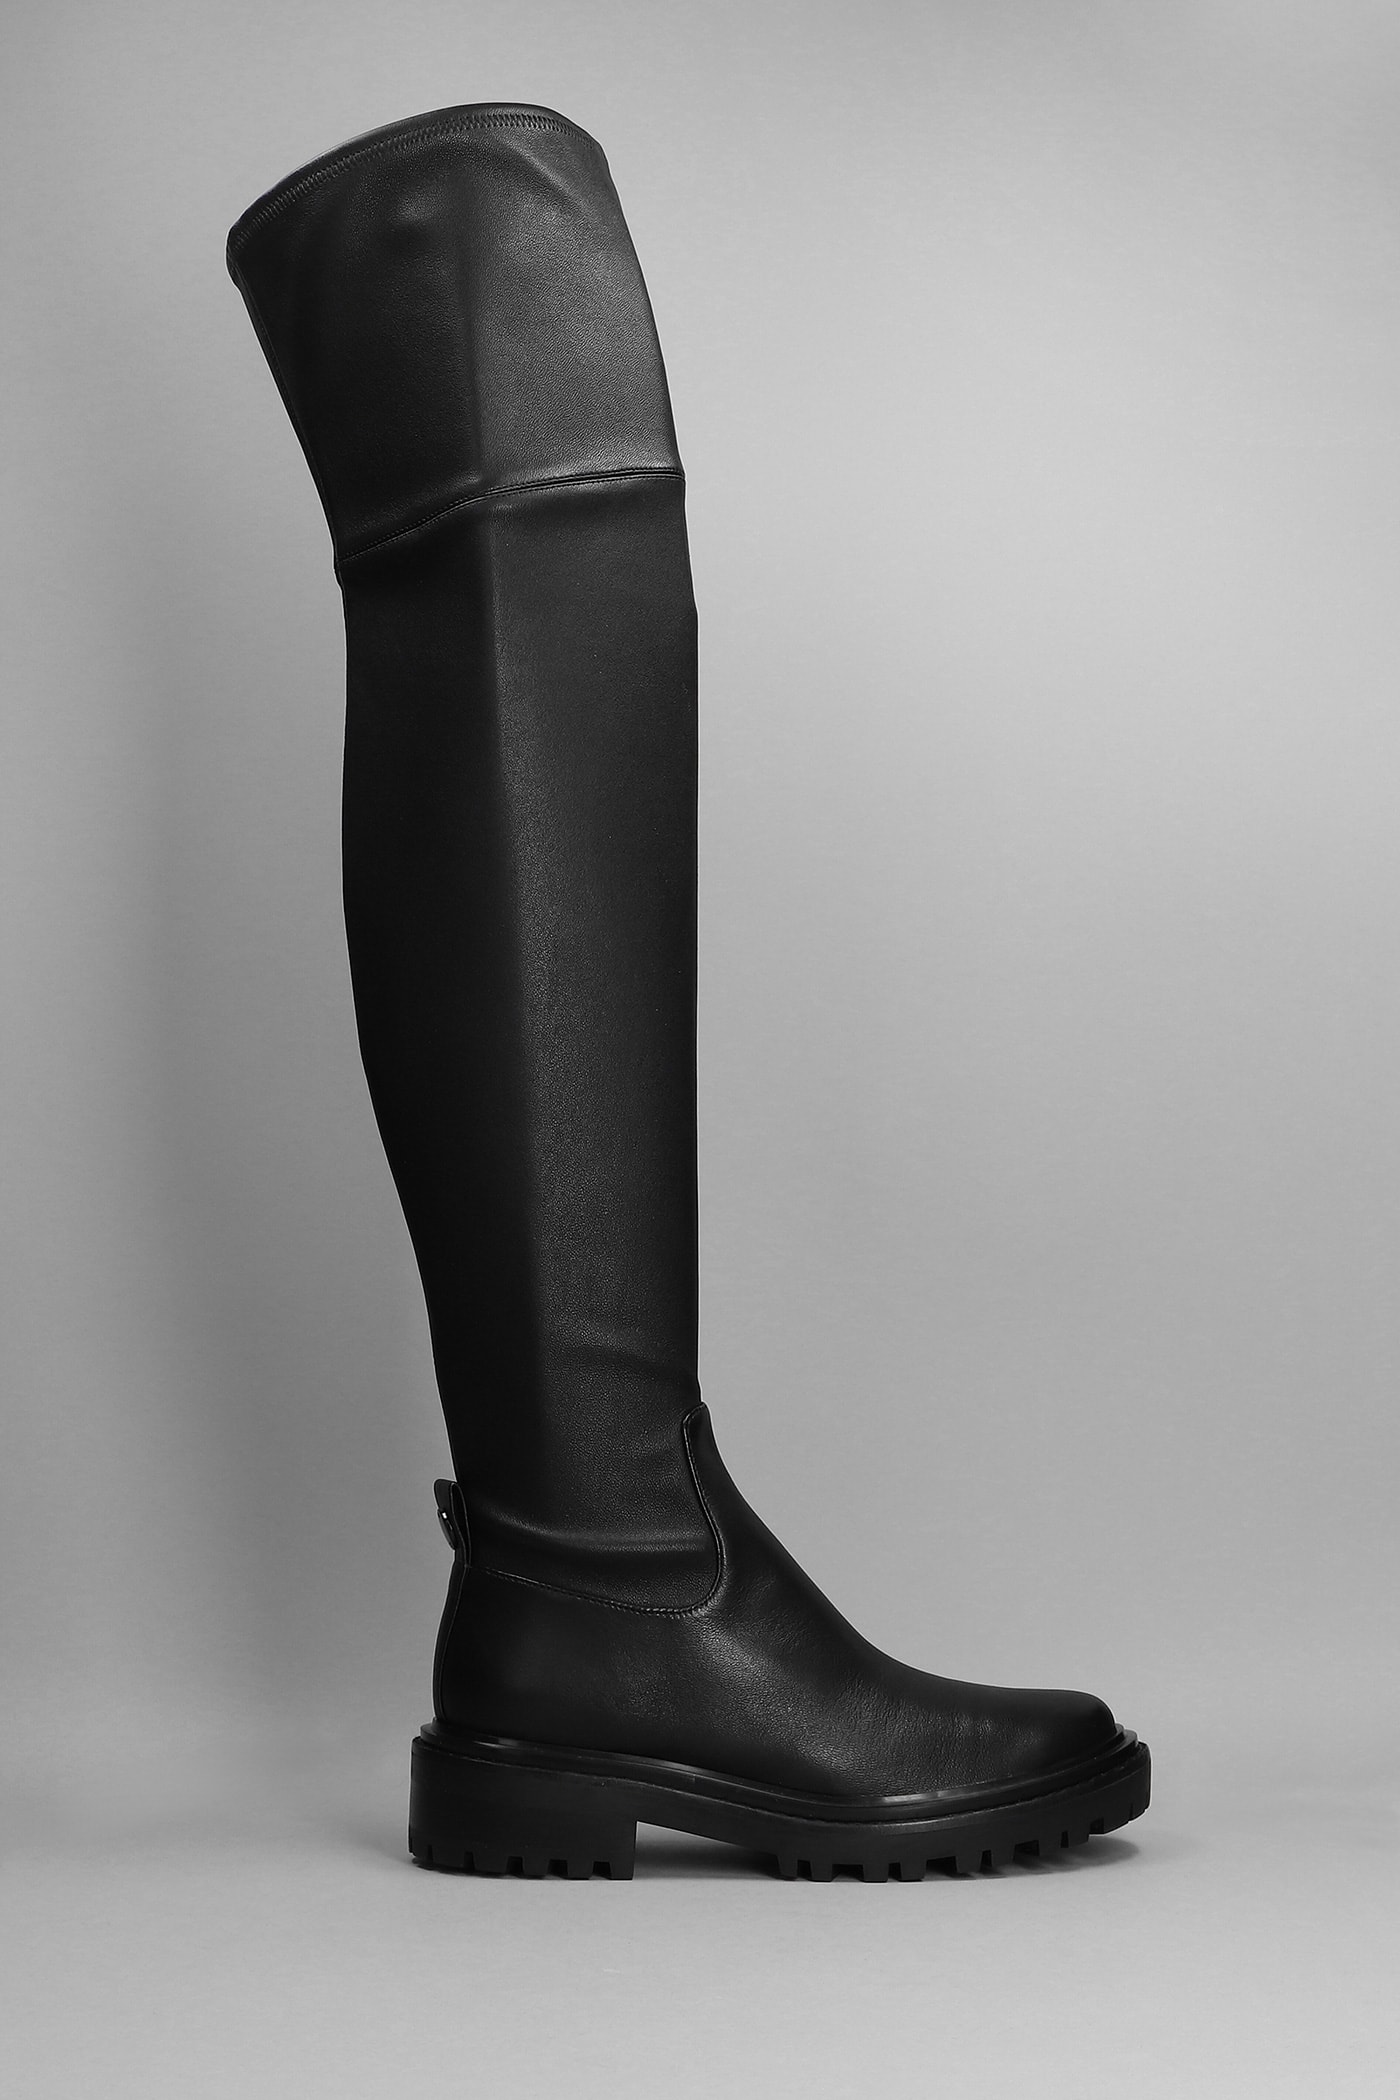 Tory Burch Low Heels Boots In Black Leather